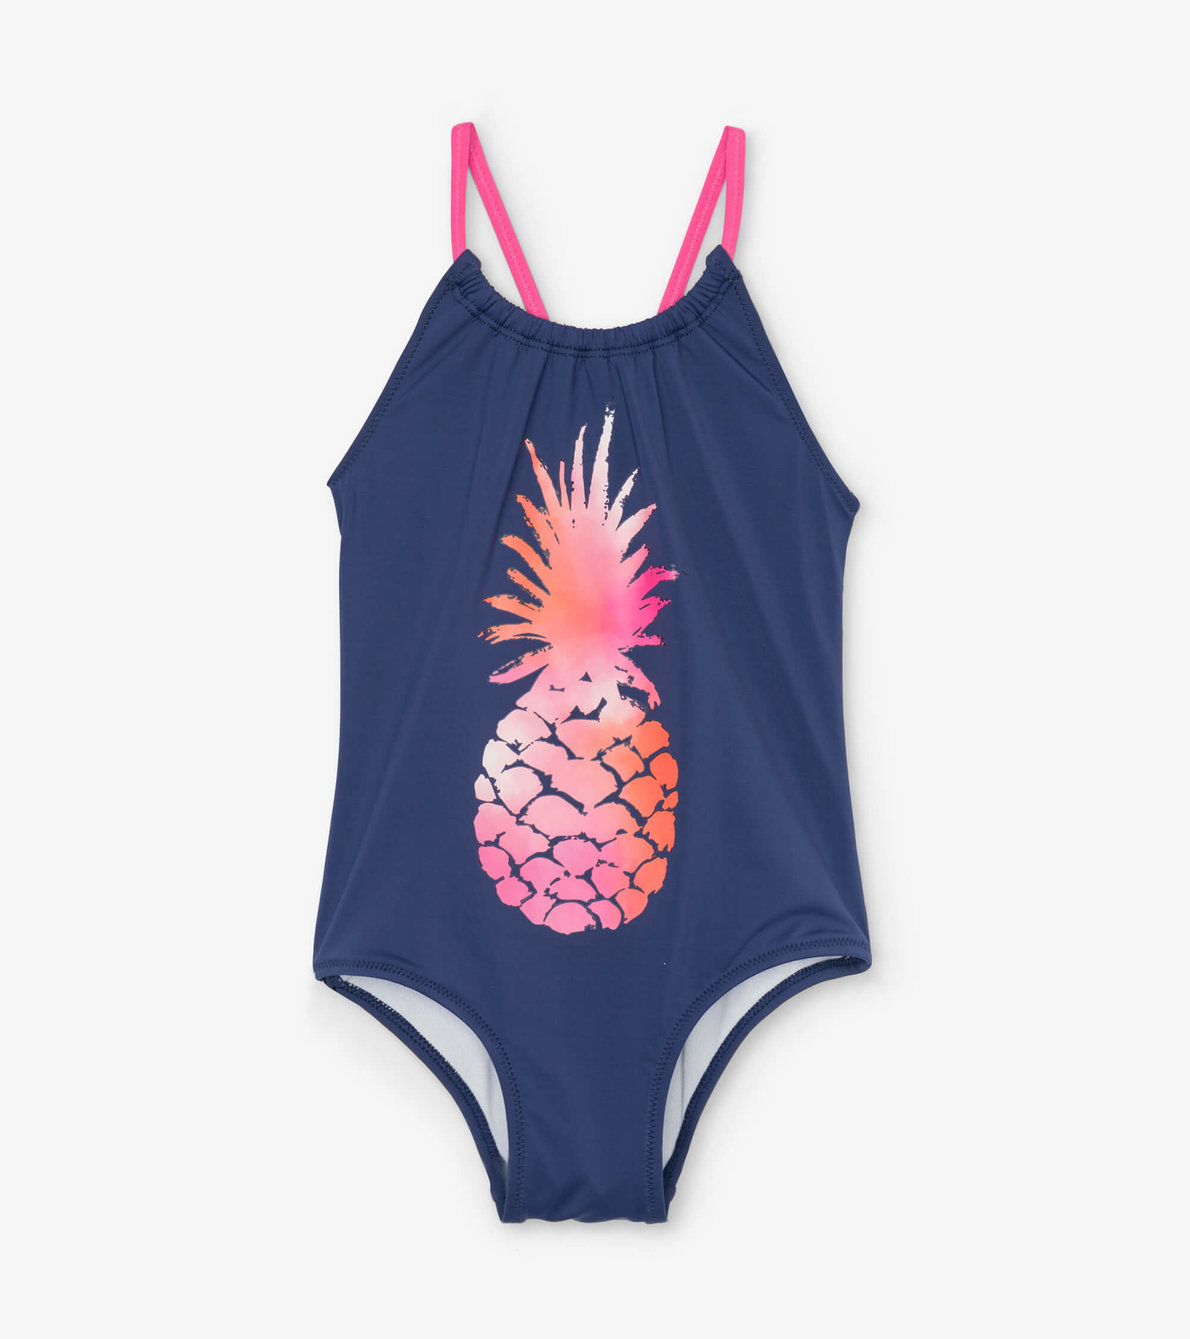 View larger image of Party Pineapples Swimsuit